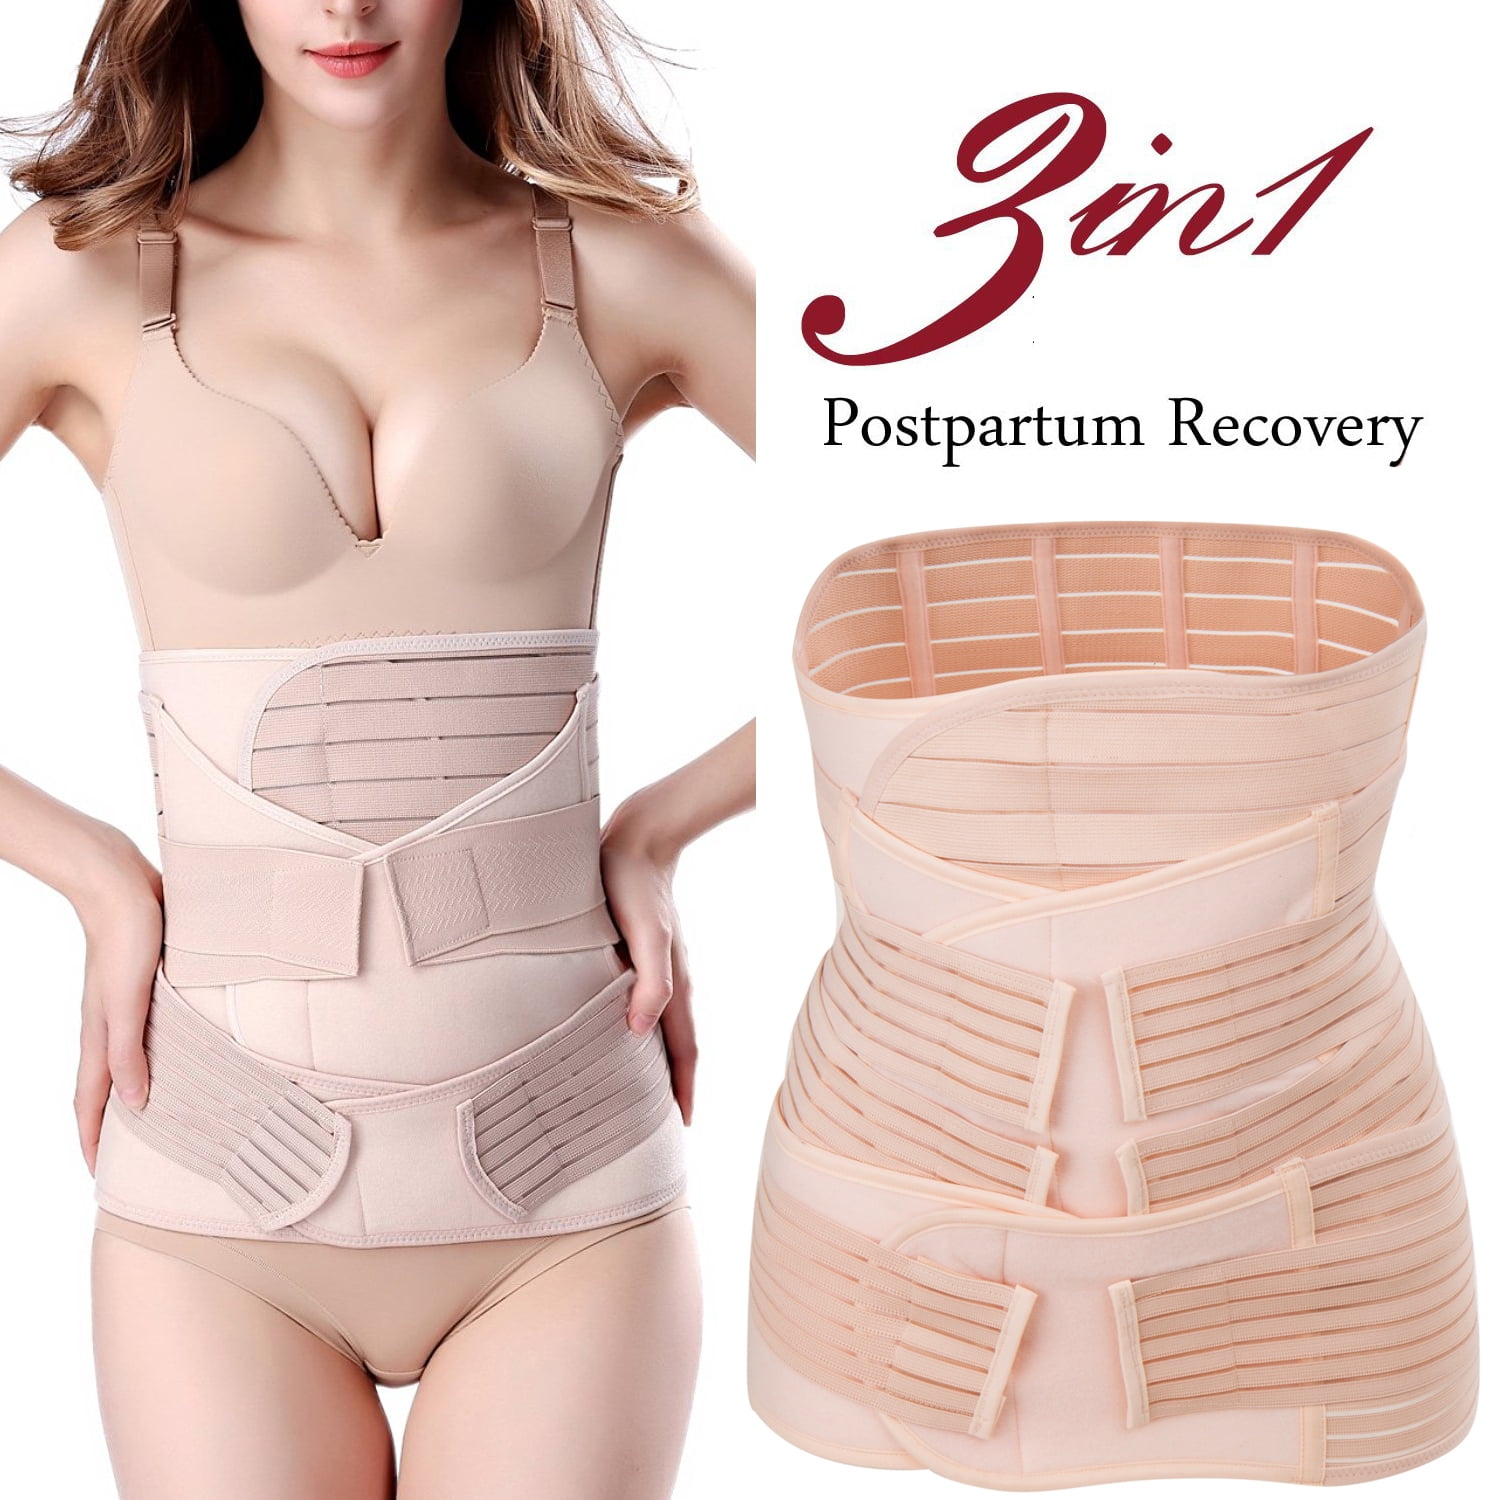 Postpartum Support Recovery Belly Wrap Girdle Support Band Belt Body Shaper 